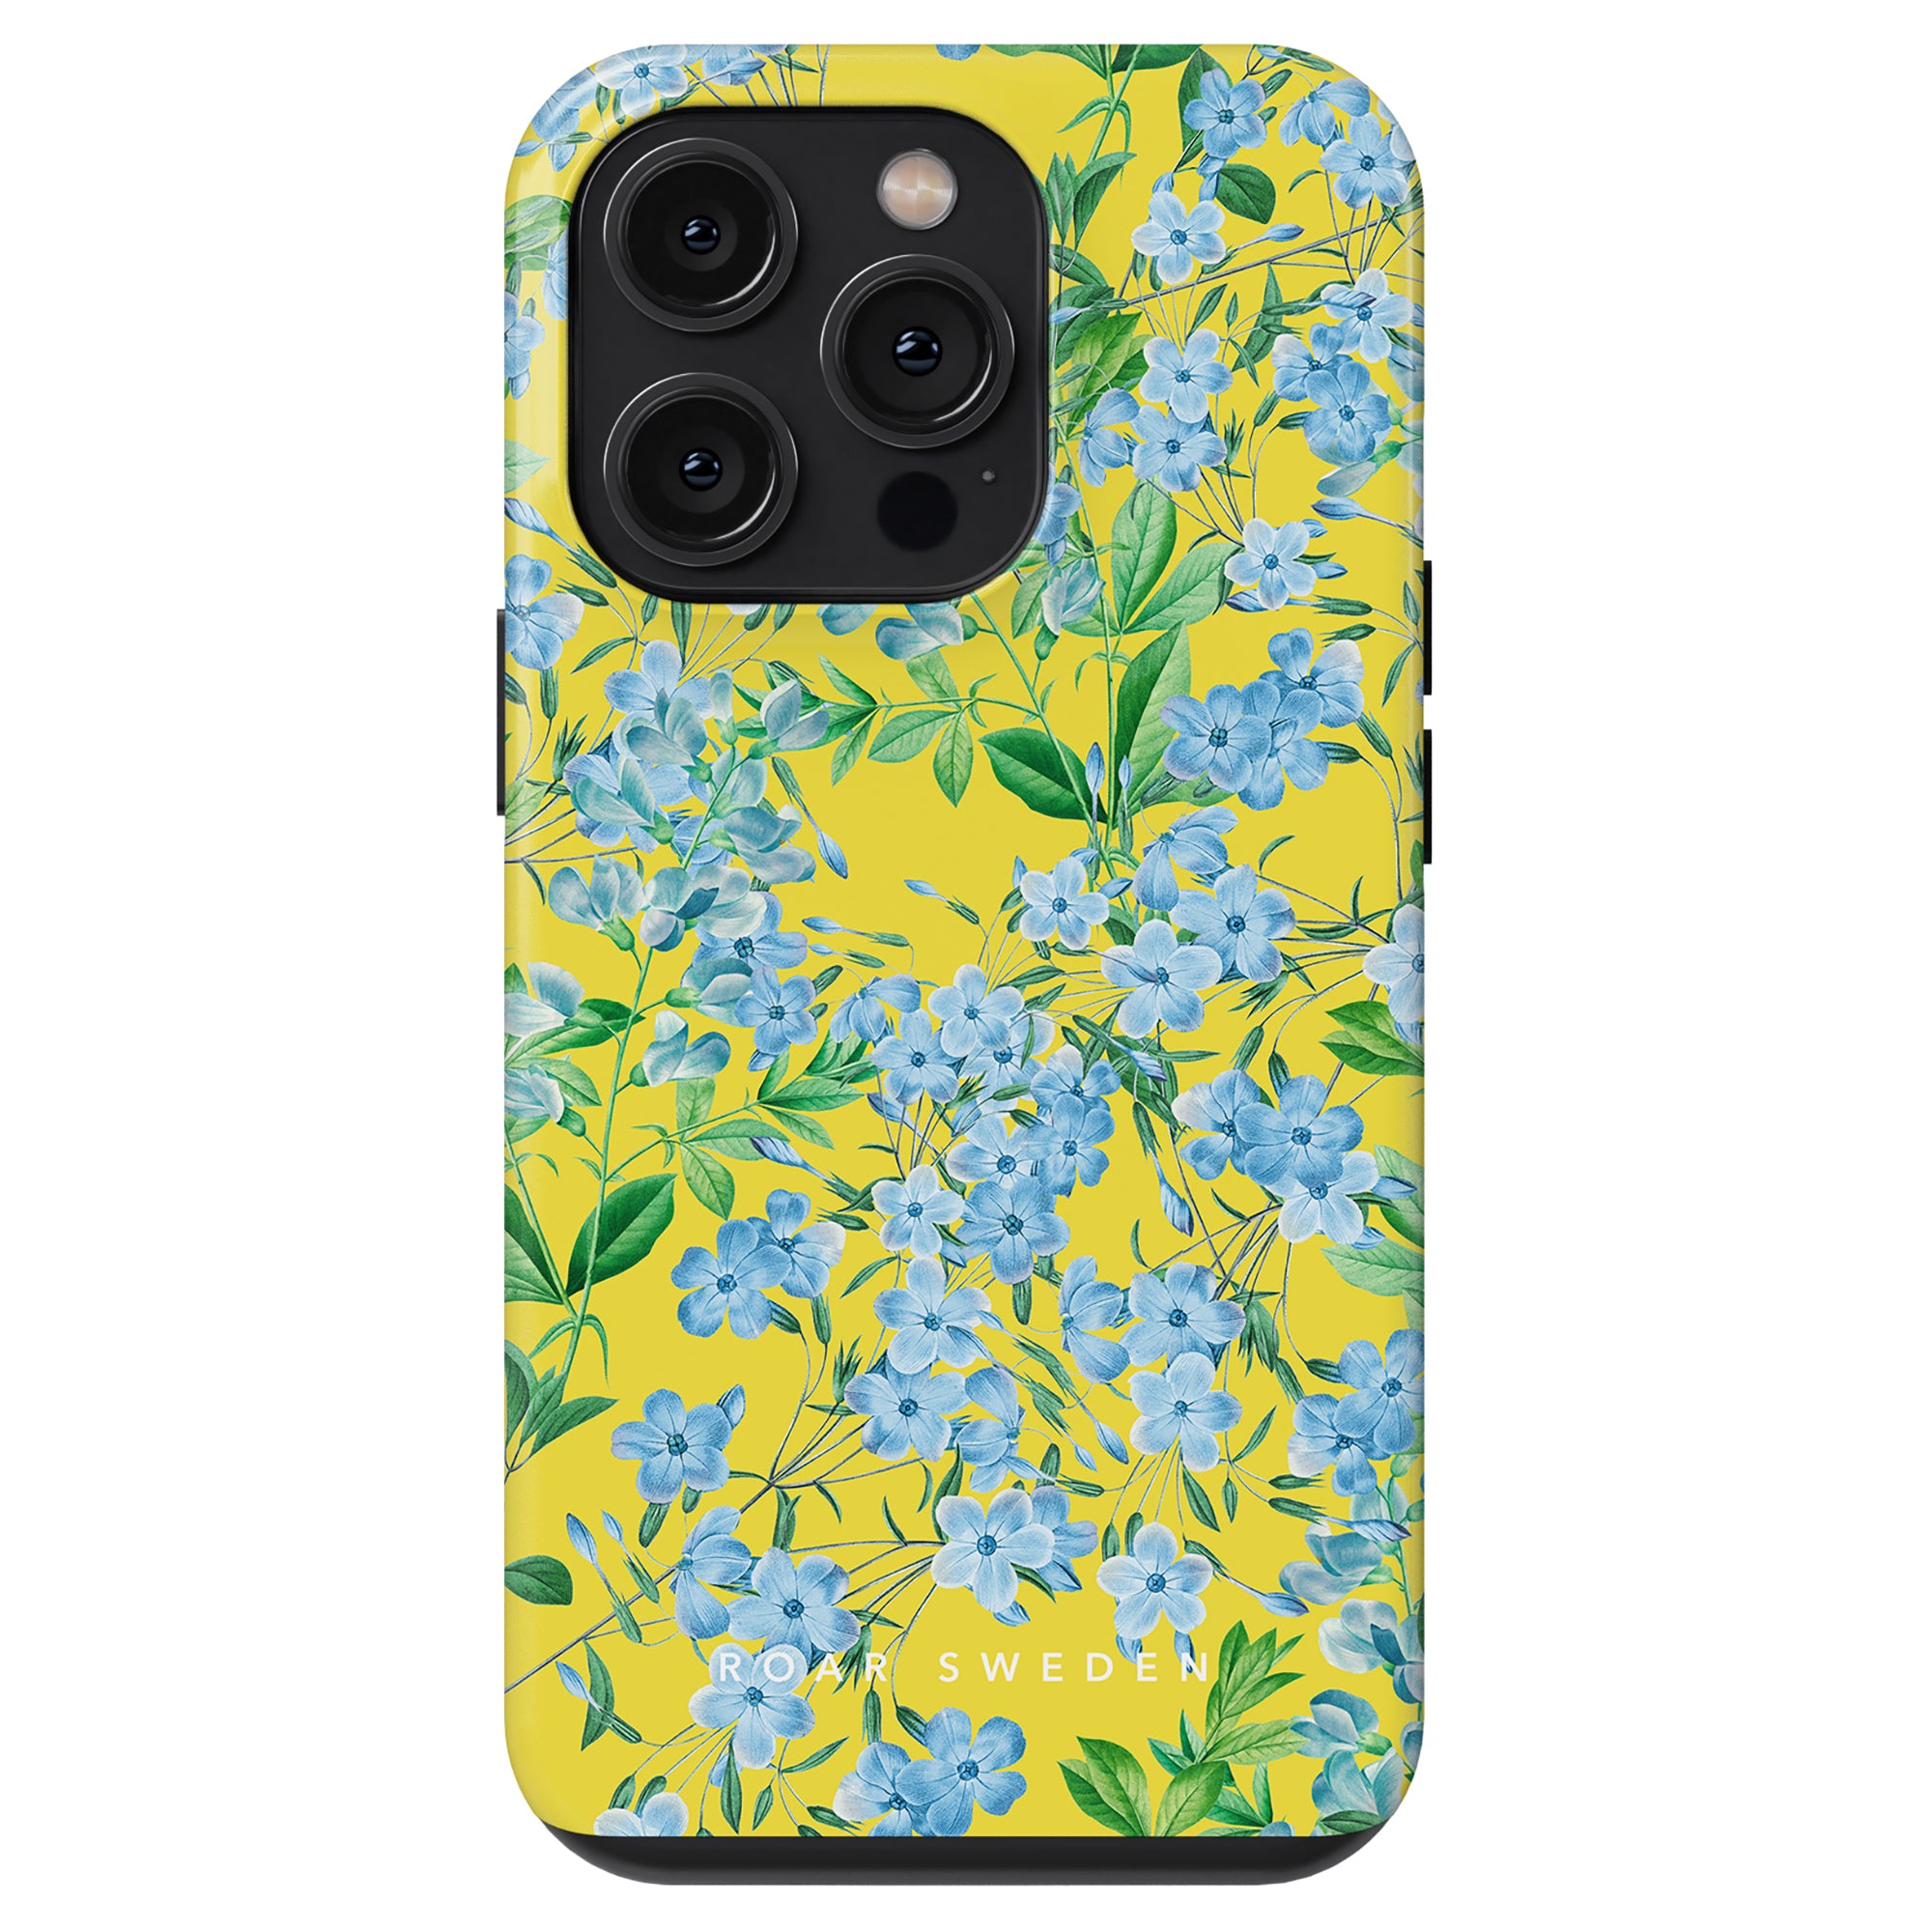 Spring Ditsy phone case with floral pattern and camera cutouts for a smartphone.